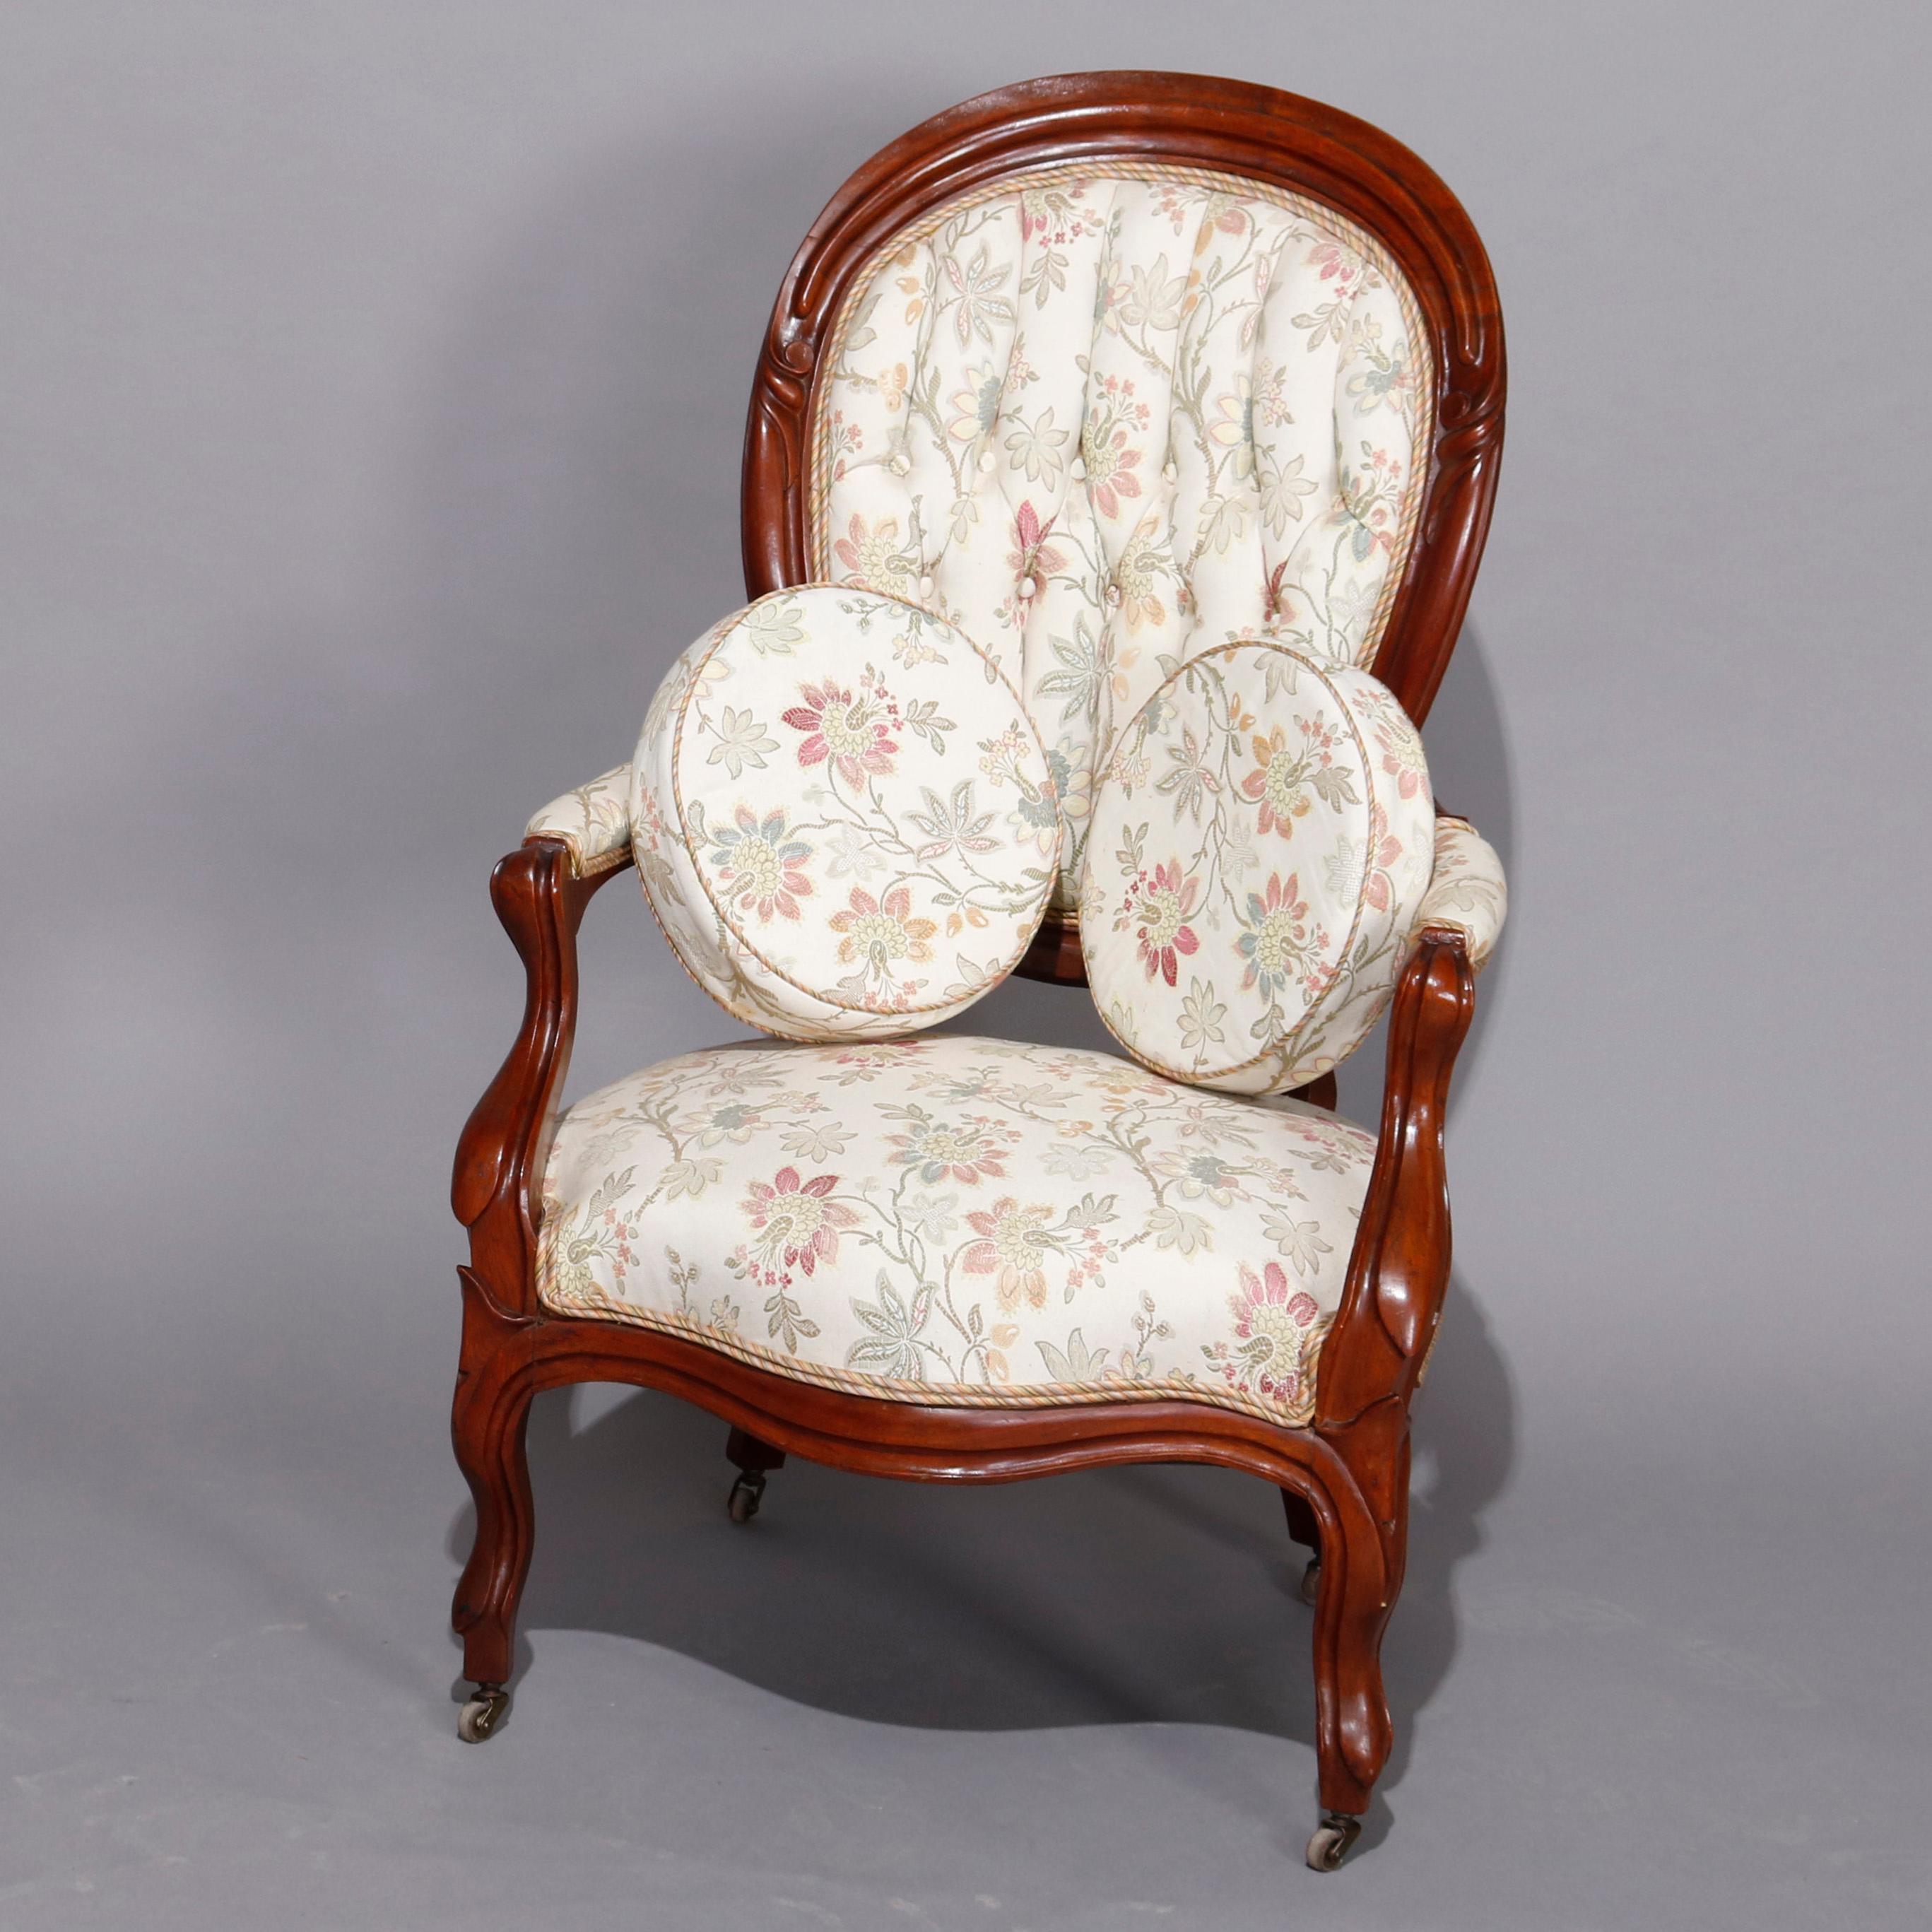 An antique Victorian parlor set offers carved walnut frames with upholstered seats and tufted backs, raised on cabriole legs, and includes gentleman's armchair and ladies side chair with skirt rail, circa 1890.

Measures: 36.25